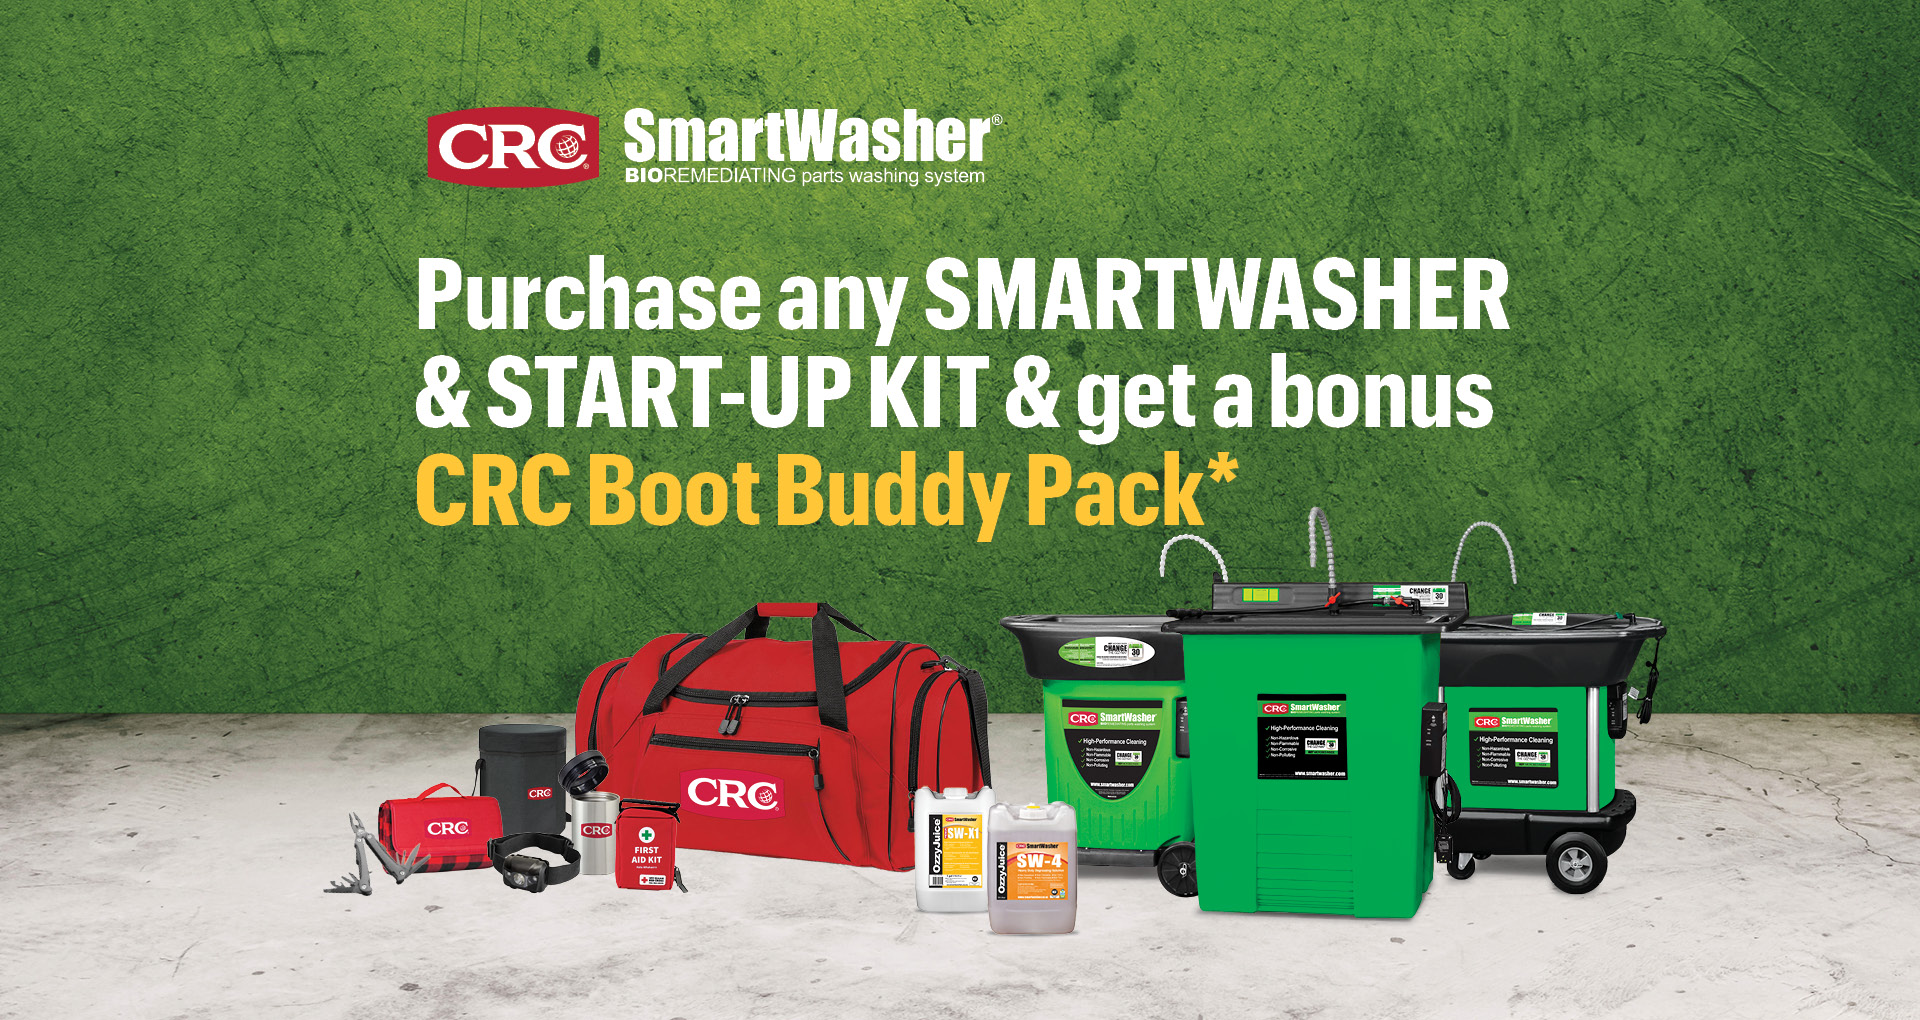 Purchase any CRC SmartWasher and start-up kit and receive a CRC Boot Buddy Pack!